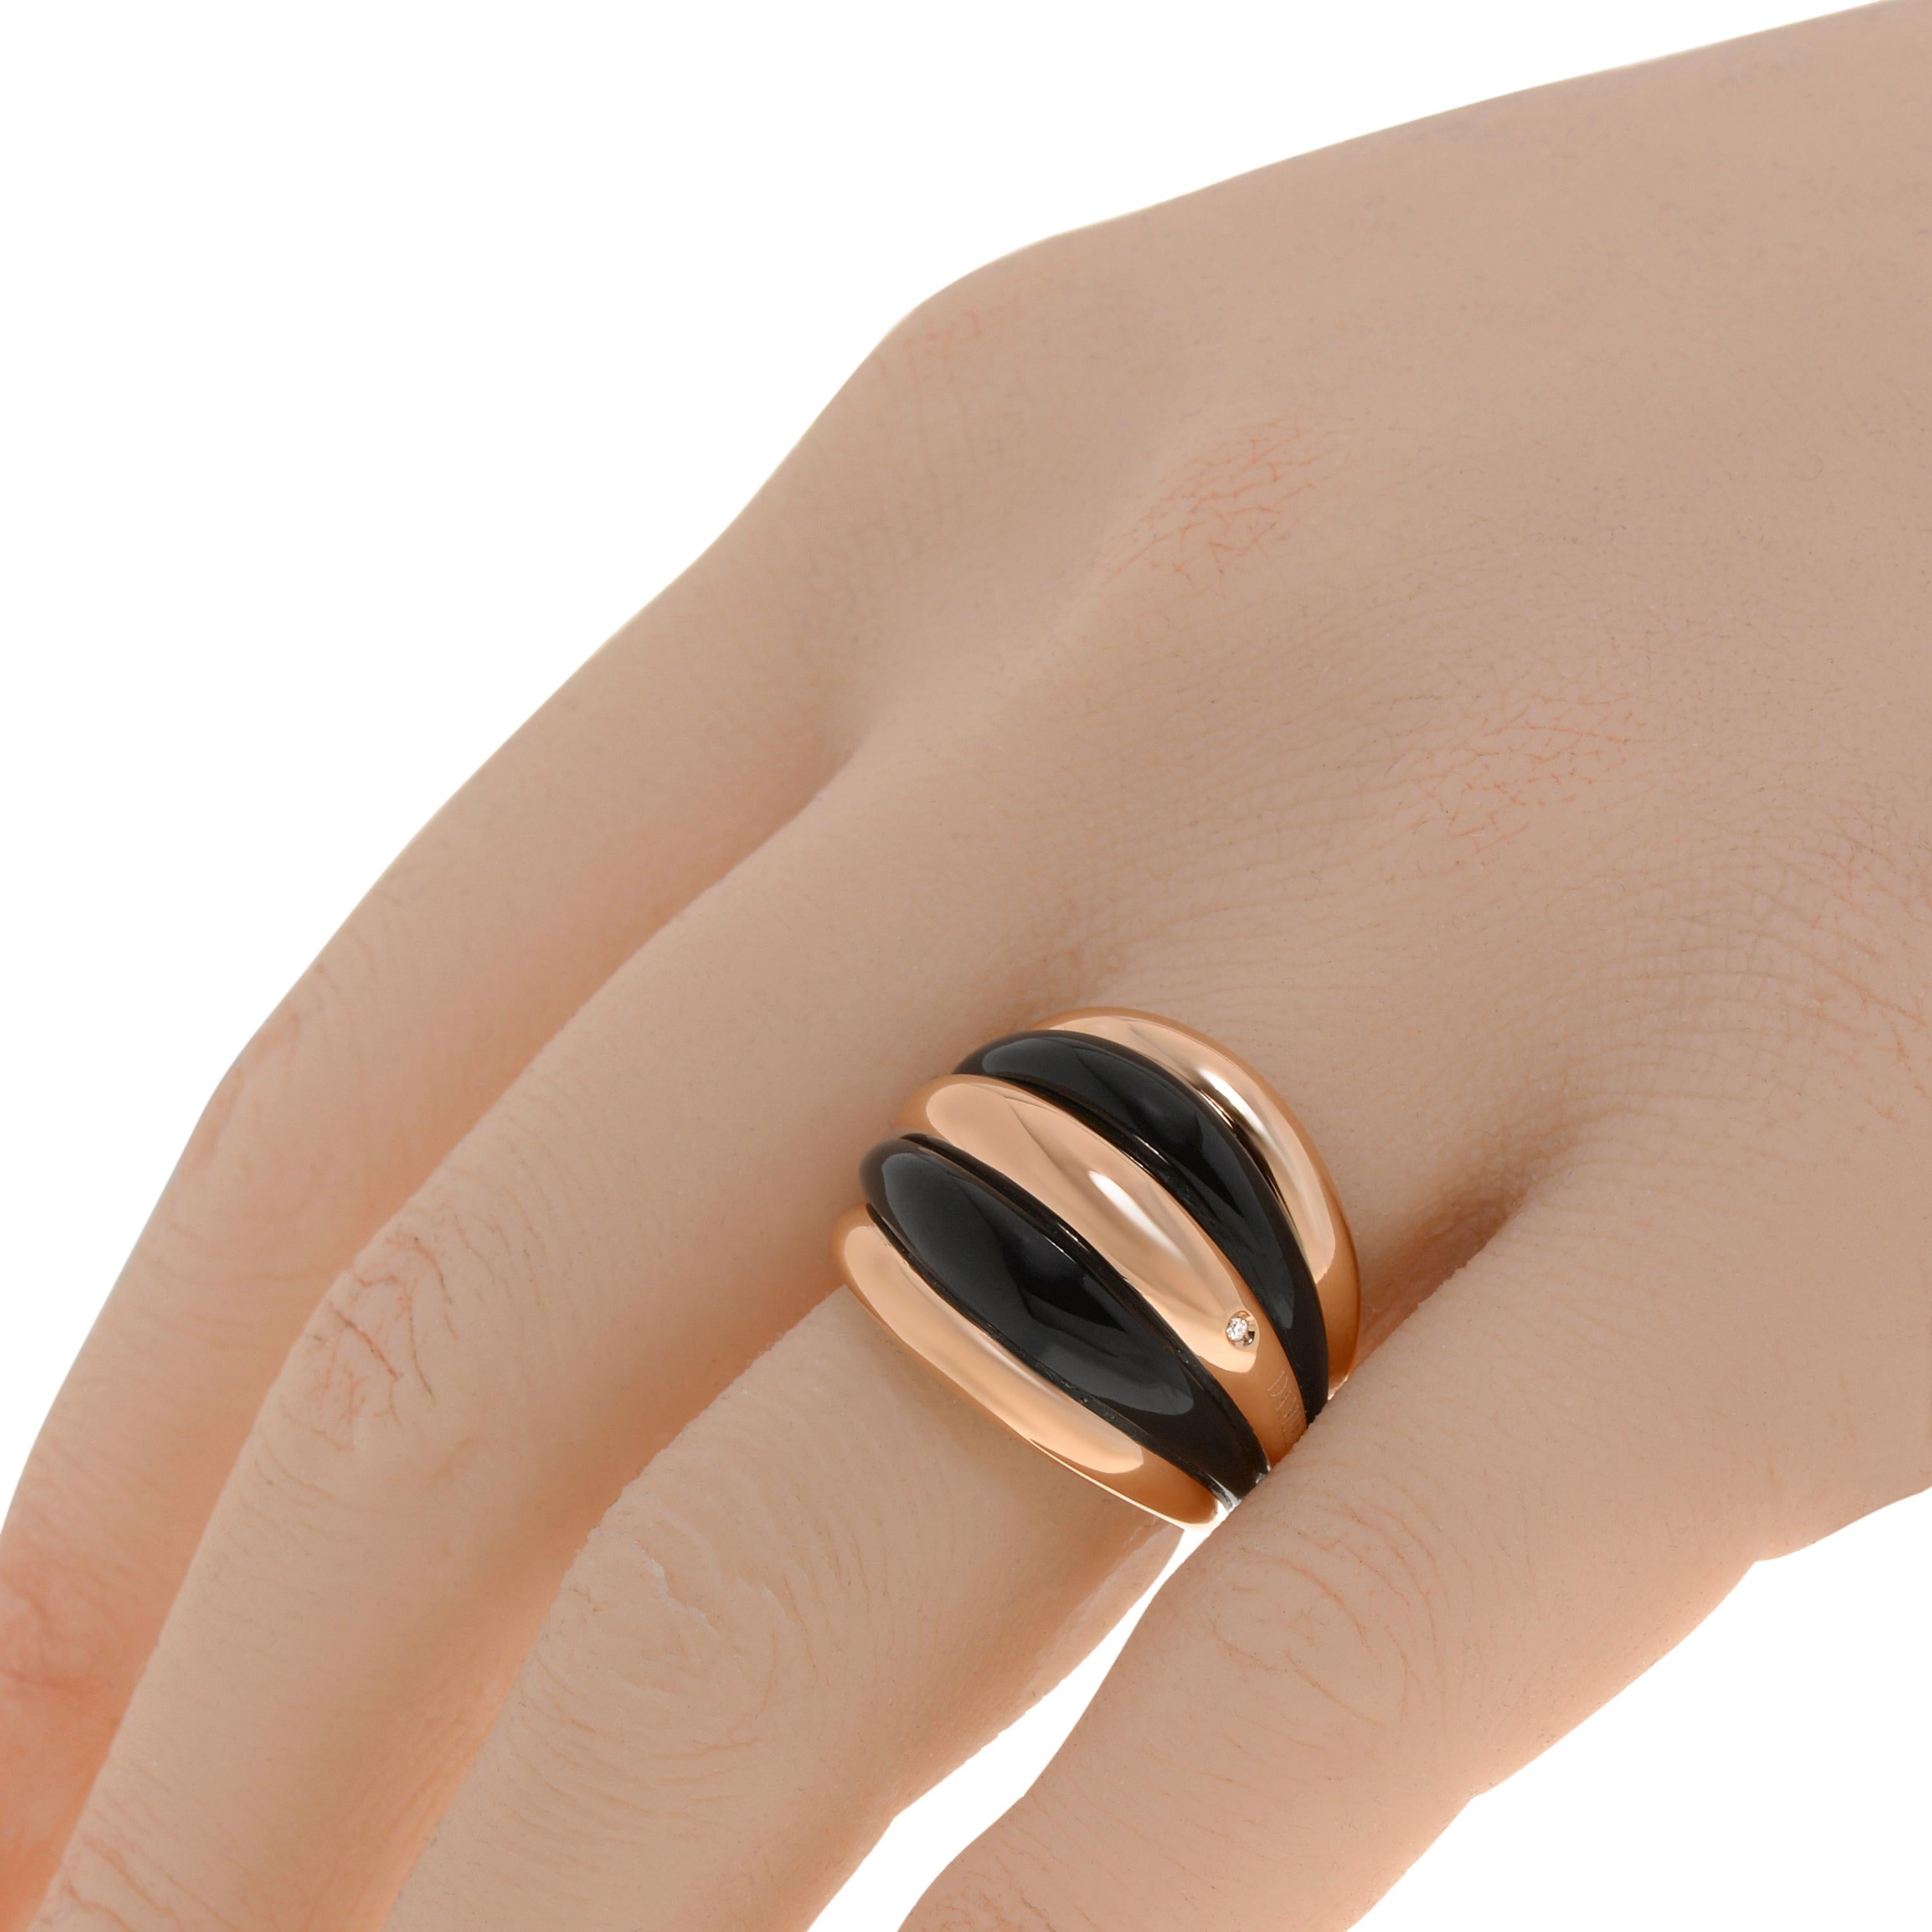 Damiani 18K rose gold statement ring features layered black onyx with an approximately 0.01ct. tw. diamond accent. The ring size is 5 (49.3). The band width is 3/4